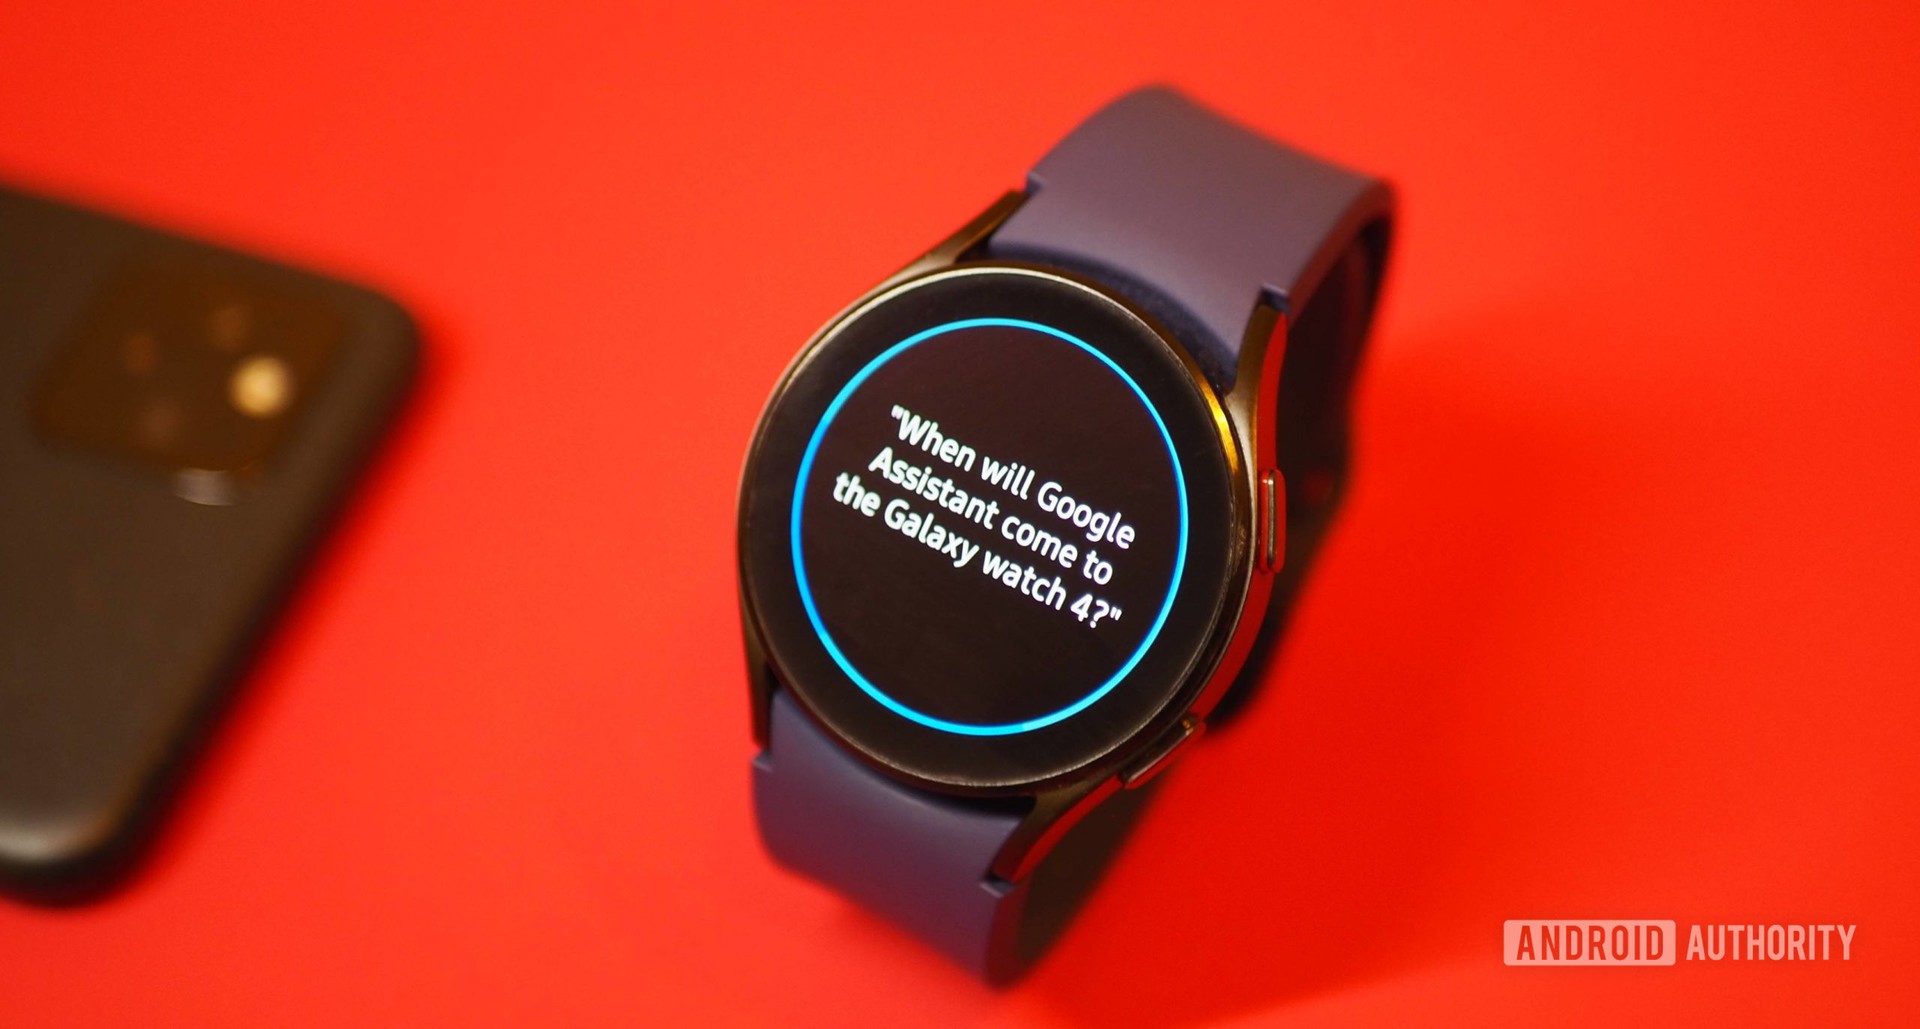 Samsung Galaxy Watch 4 on red background, showing Bixby question about Google Assistant